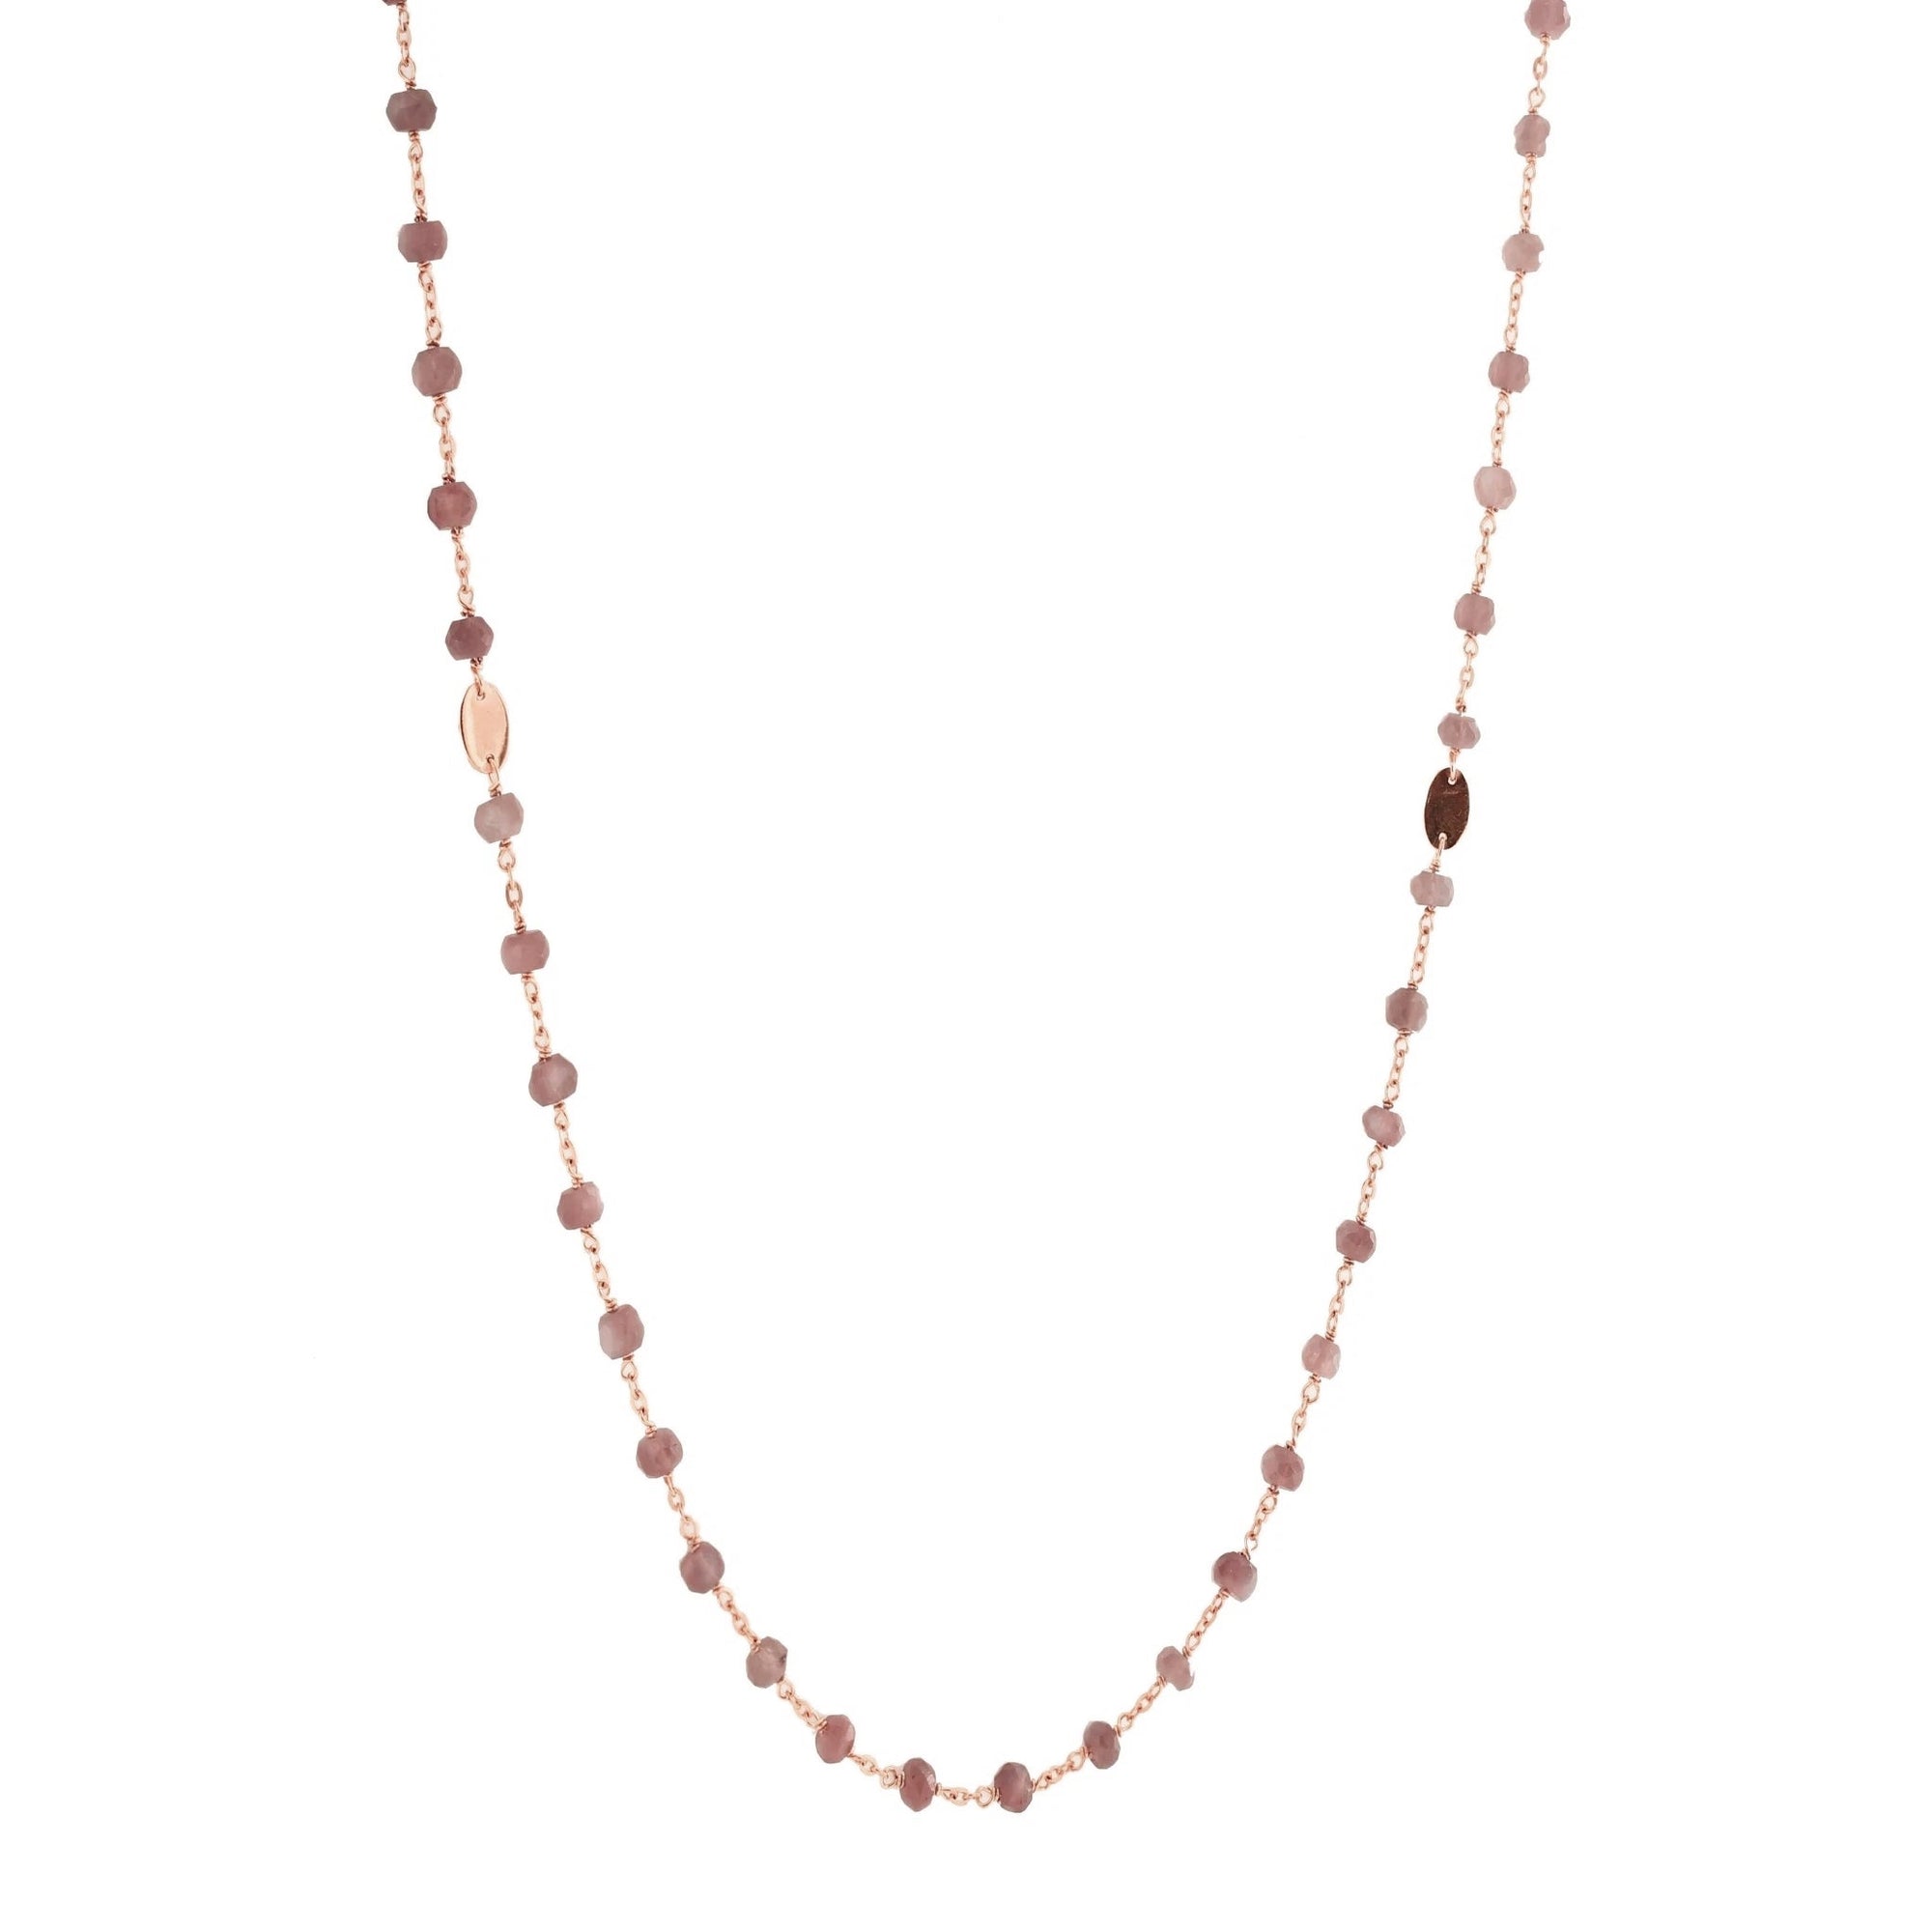 ICONIC LONG BEADED NECKLACE - GREY MOONSTONE & ROSE GOLD 34" - SO PRETTY CARA COTTER